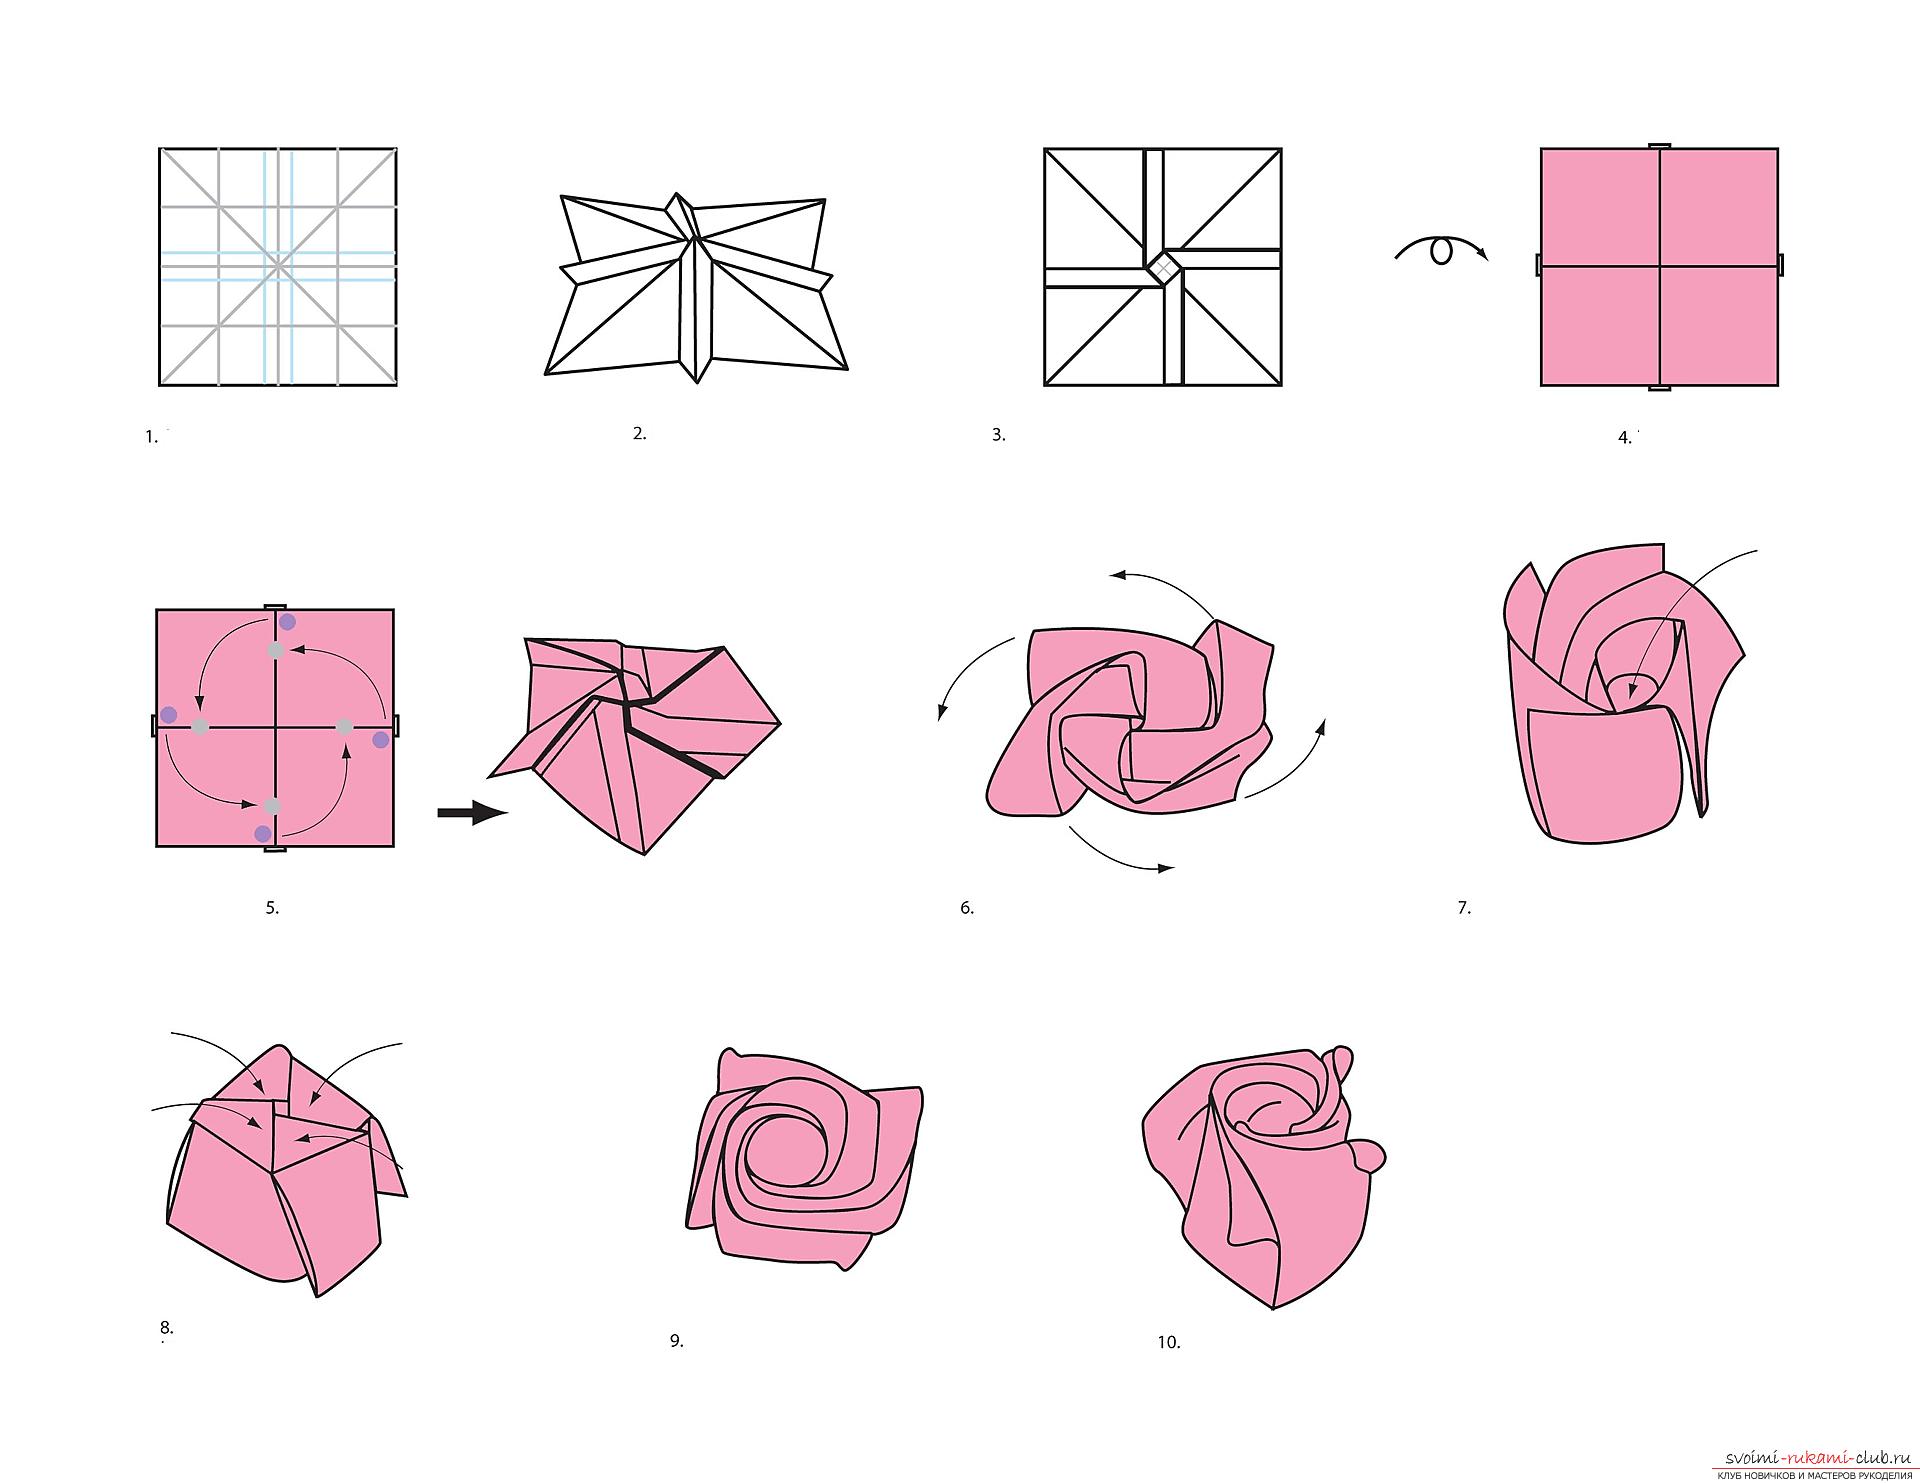 Simple schemes of origami flowers. Photo №4